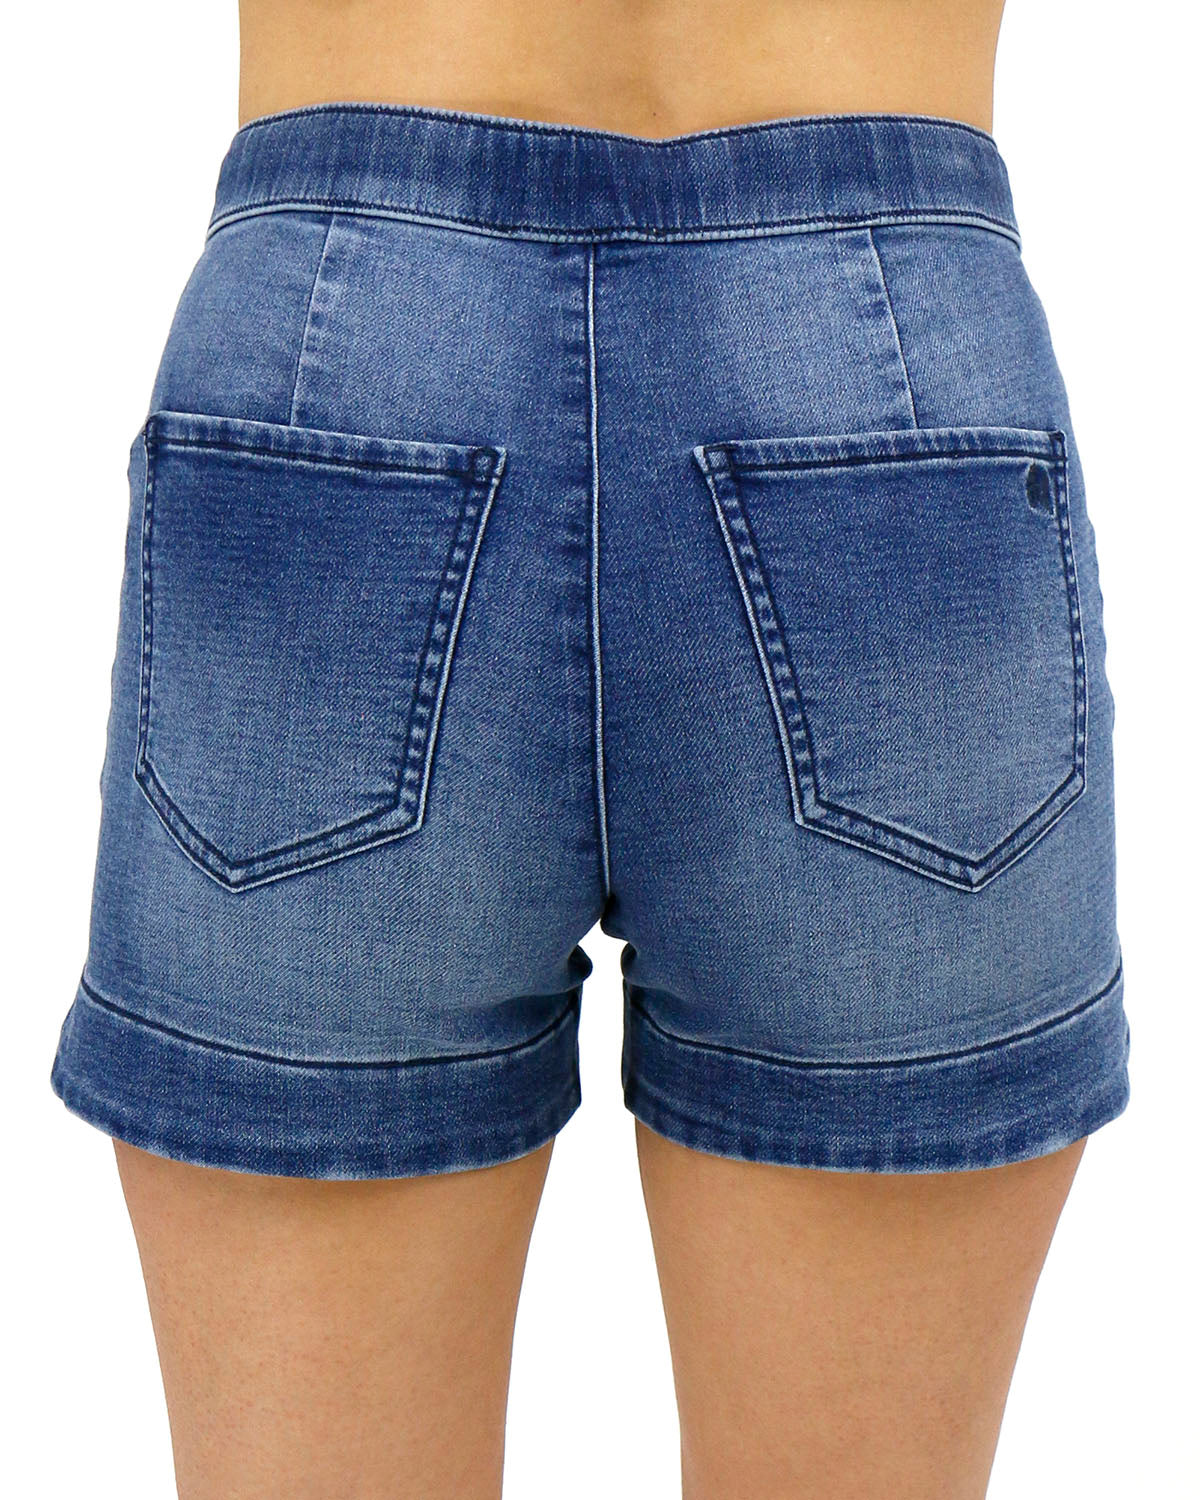 Ultimate Denim Shorts in Mid-Wash